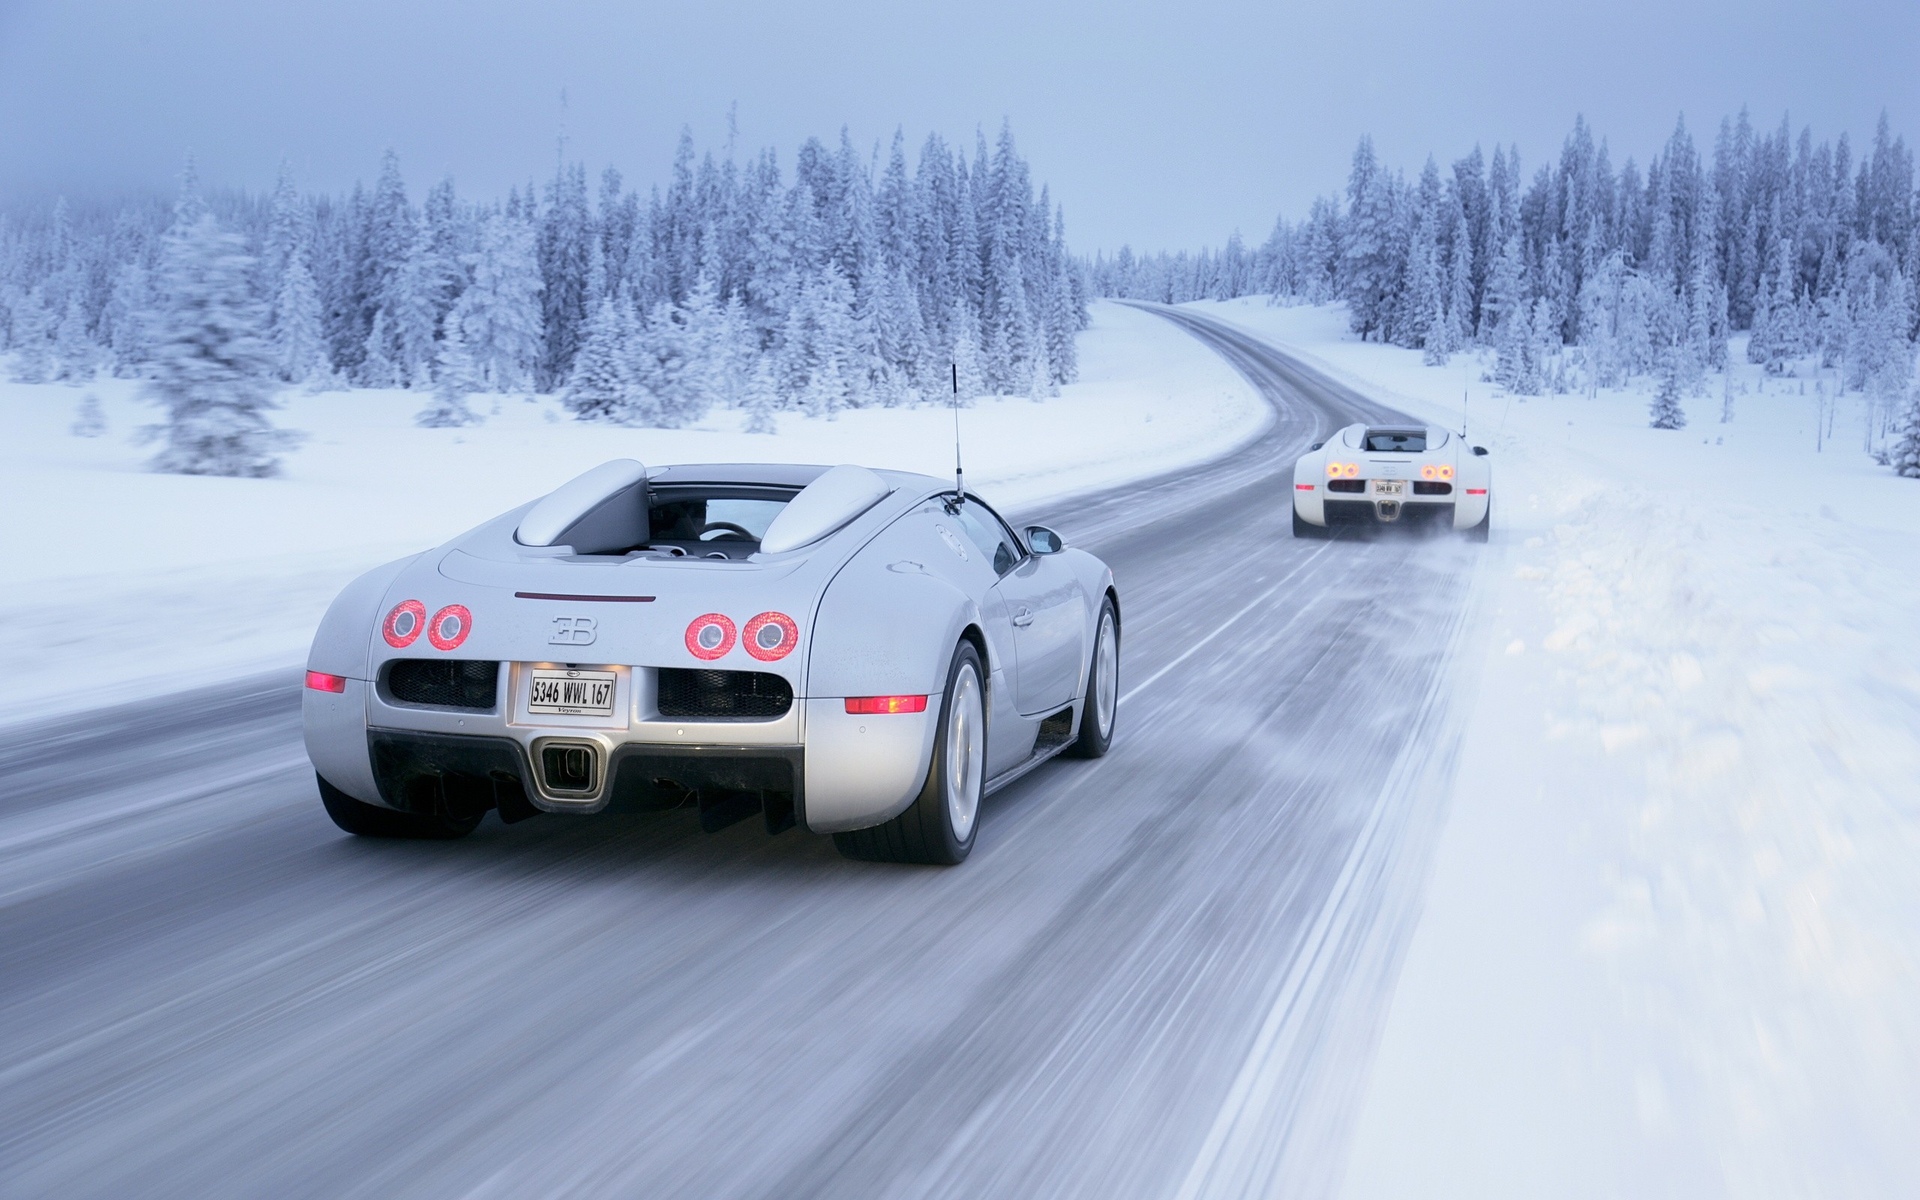 bugatti, Veyron, Vehicles, Cars, Exotic, Supercar, Landscapes, Nature, Winter, Snow, Blizzard, Trees, Forests, Roads, Track Wallpaper